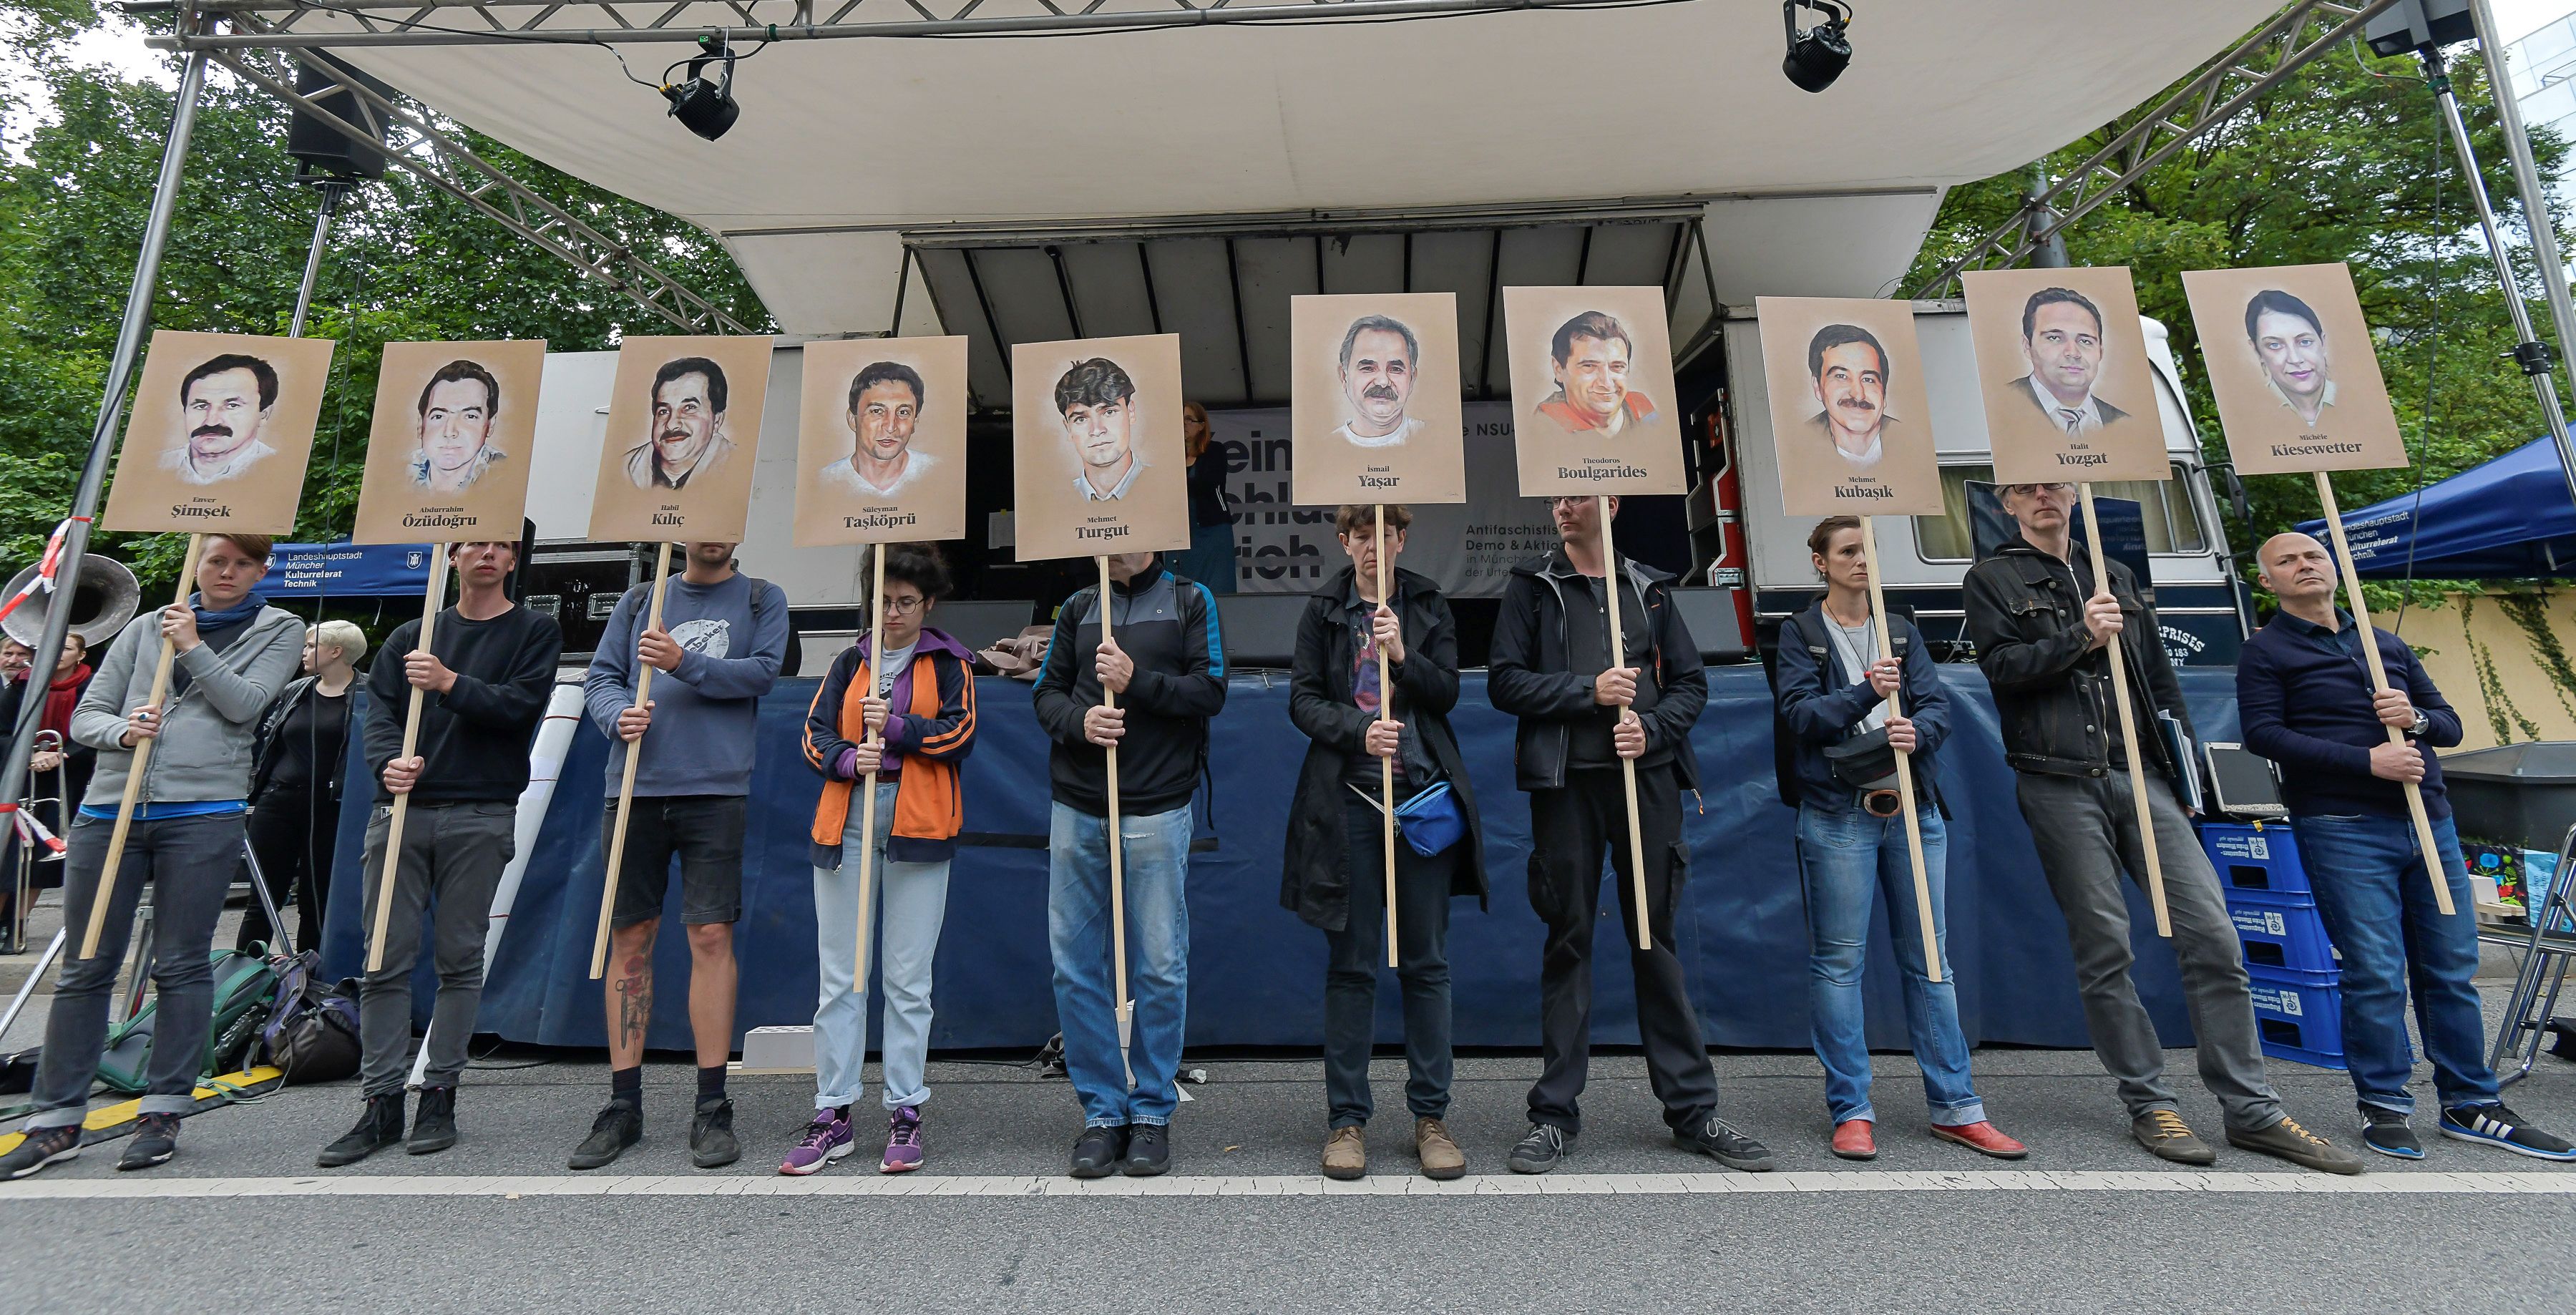 Protesters hold up signs with pictures of the victims of neo-Nazi cell National Socialist Underground (NSU) before the proclamation of sentence in the trial against Beate Zschaepe, the only surviving member of the NSU behind a string of racist murders, in Munich, Germany, on July 11, 2018. - Zschaepe, 43, is accused of complicity in 10 deadly shootings of mostly Turkish and Greek-born immigrants carried out by clandestine trio the National Socialist Underground (NSU). (Photo by Gunter SCHIFFMANN / AFP) (Photo credit should read GUNTER SCHIFFMANN/AFP/Getty Images)